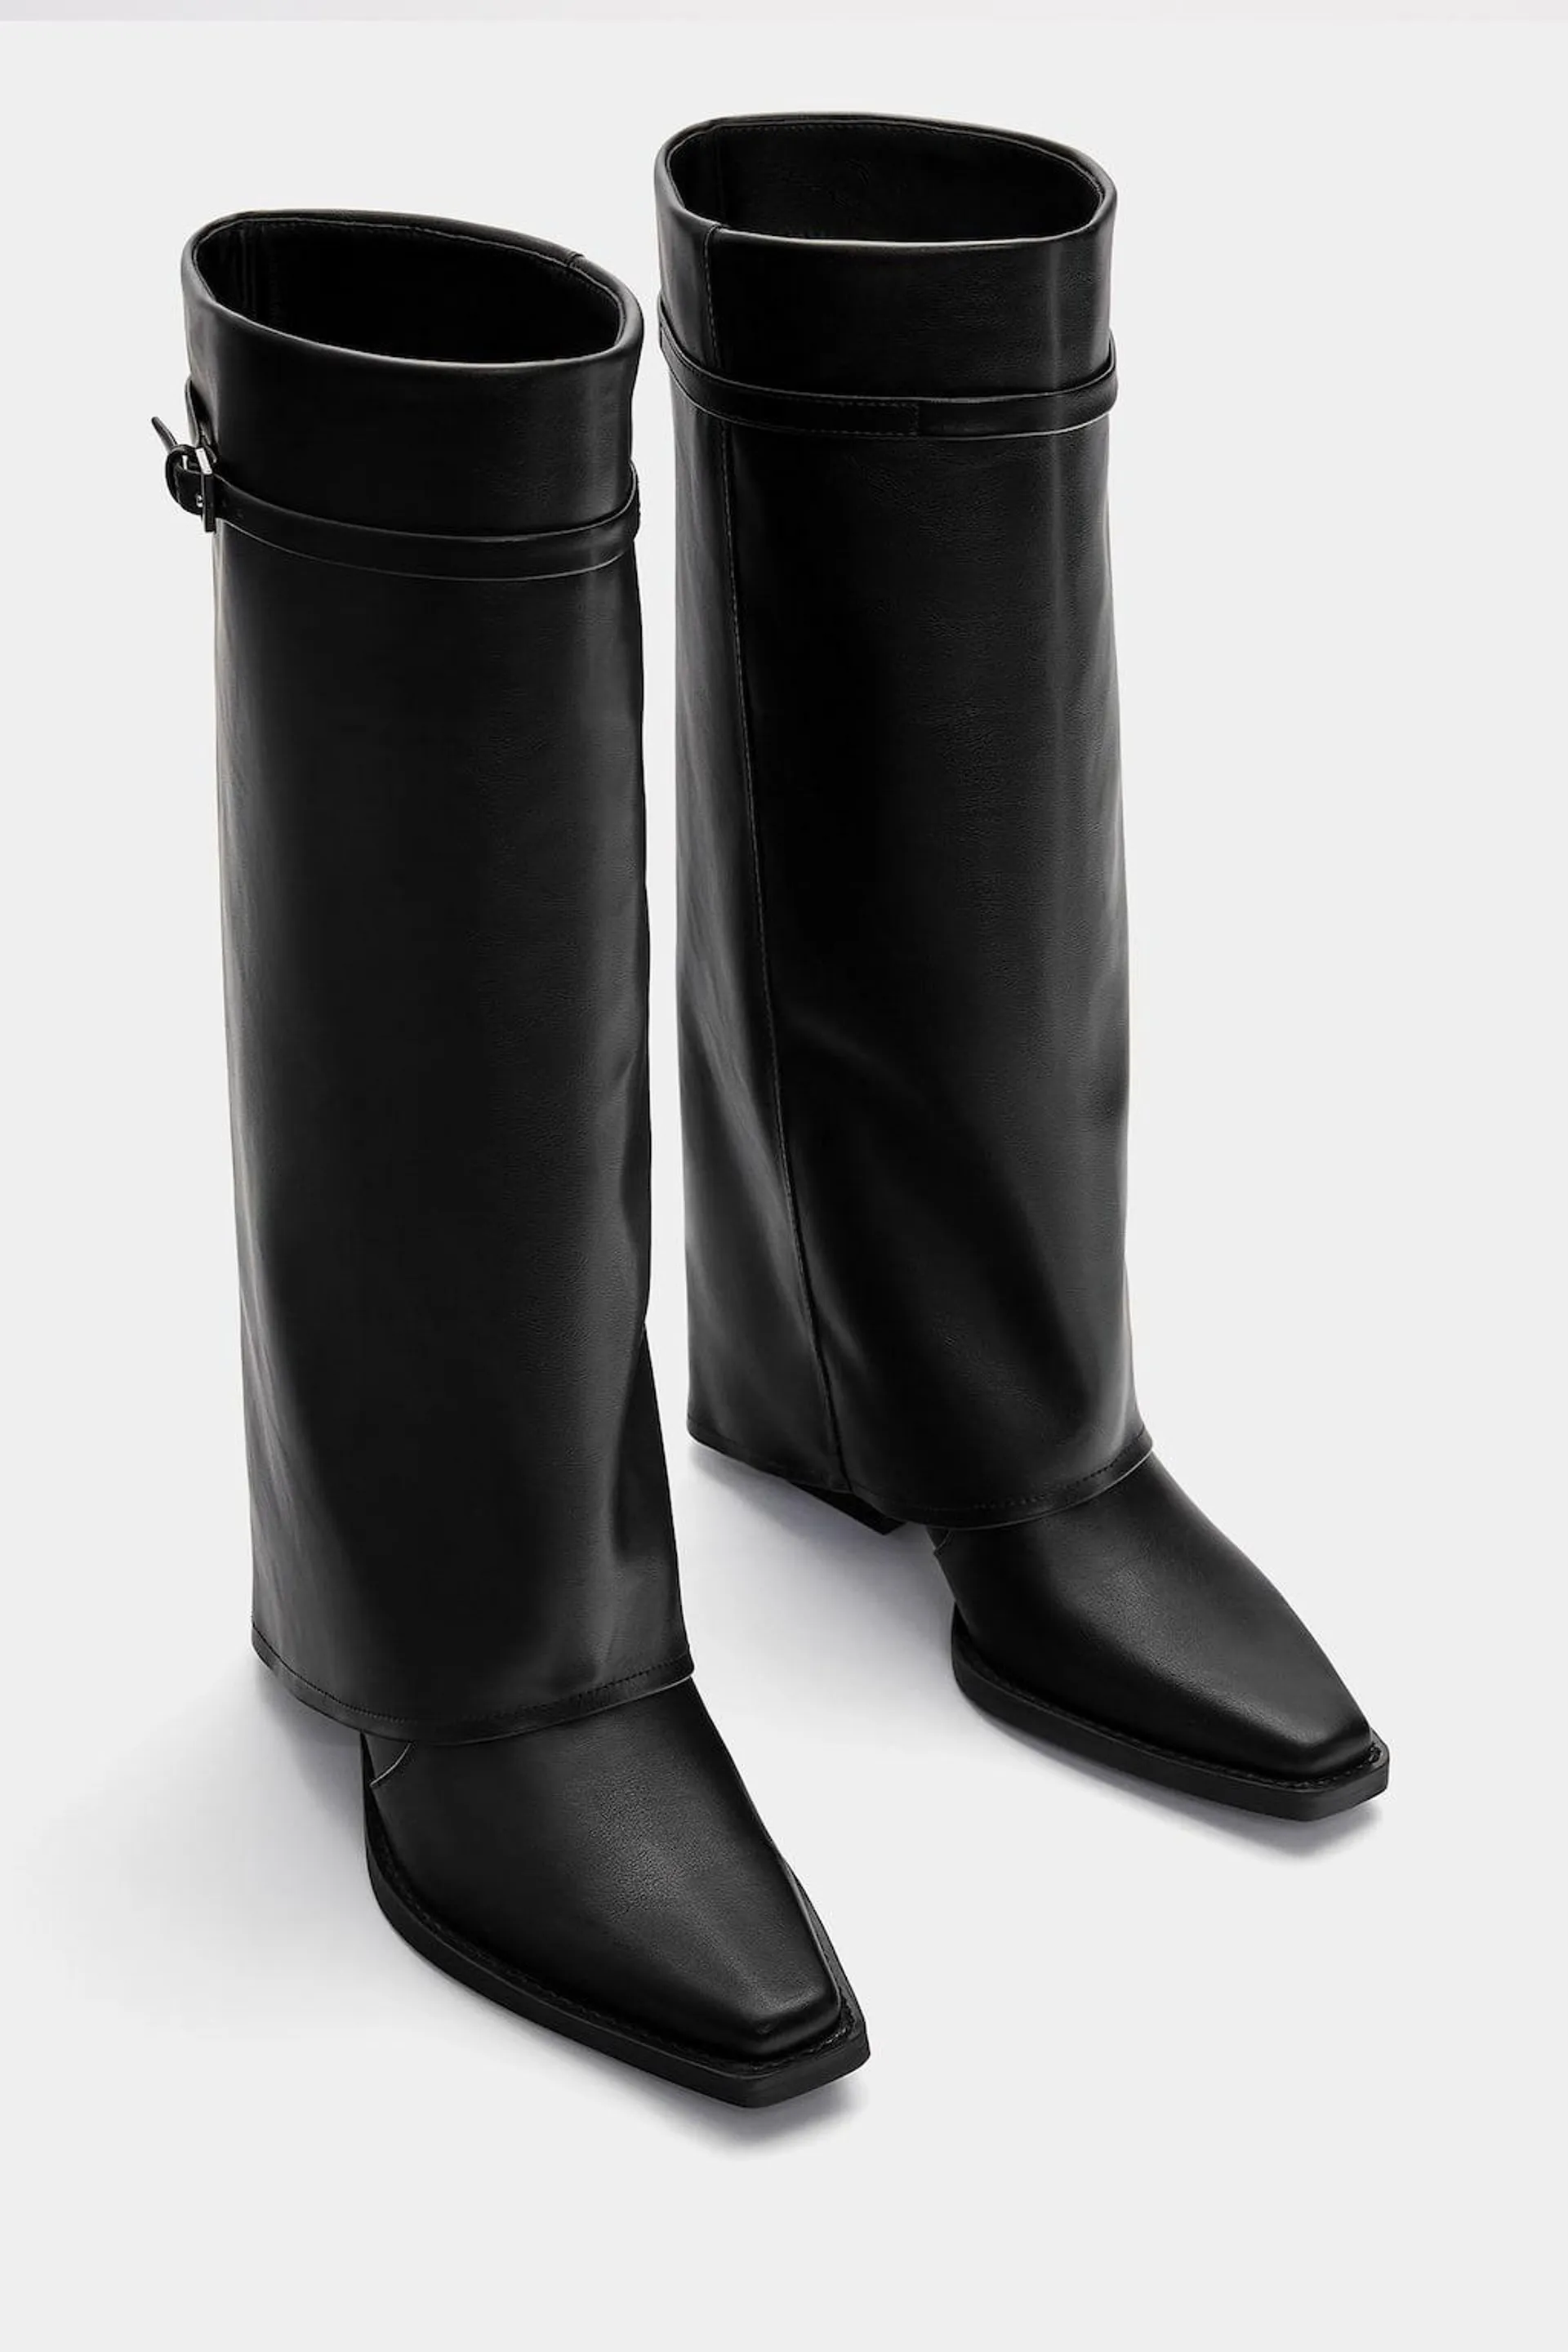 GAITER BOOTS WITH BUCKLES